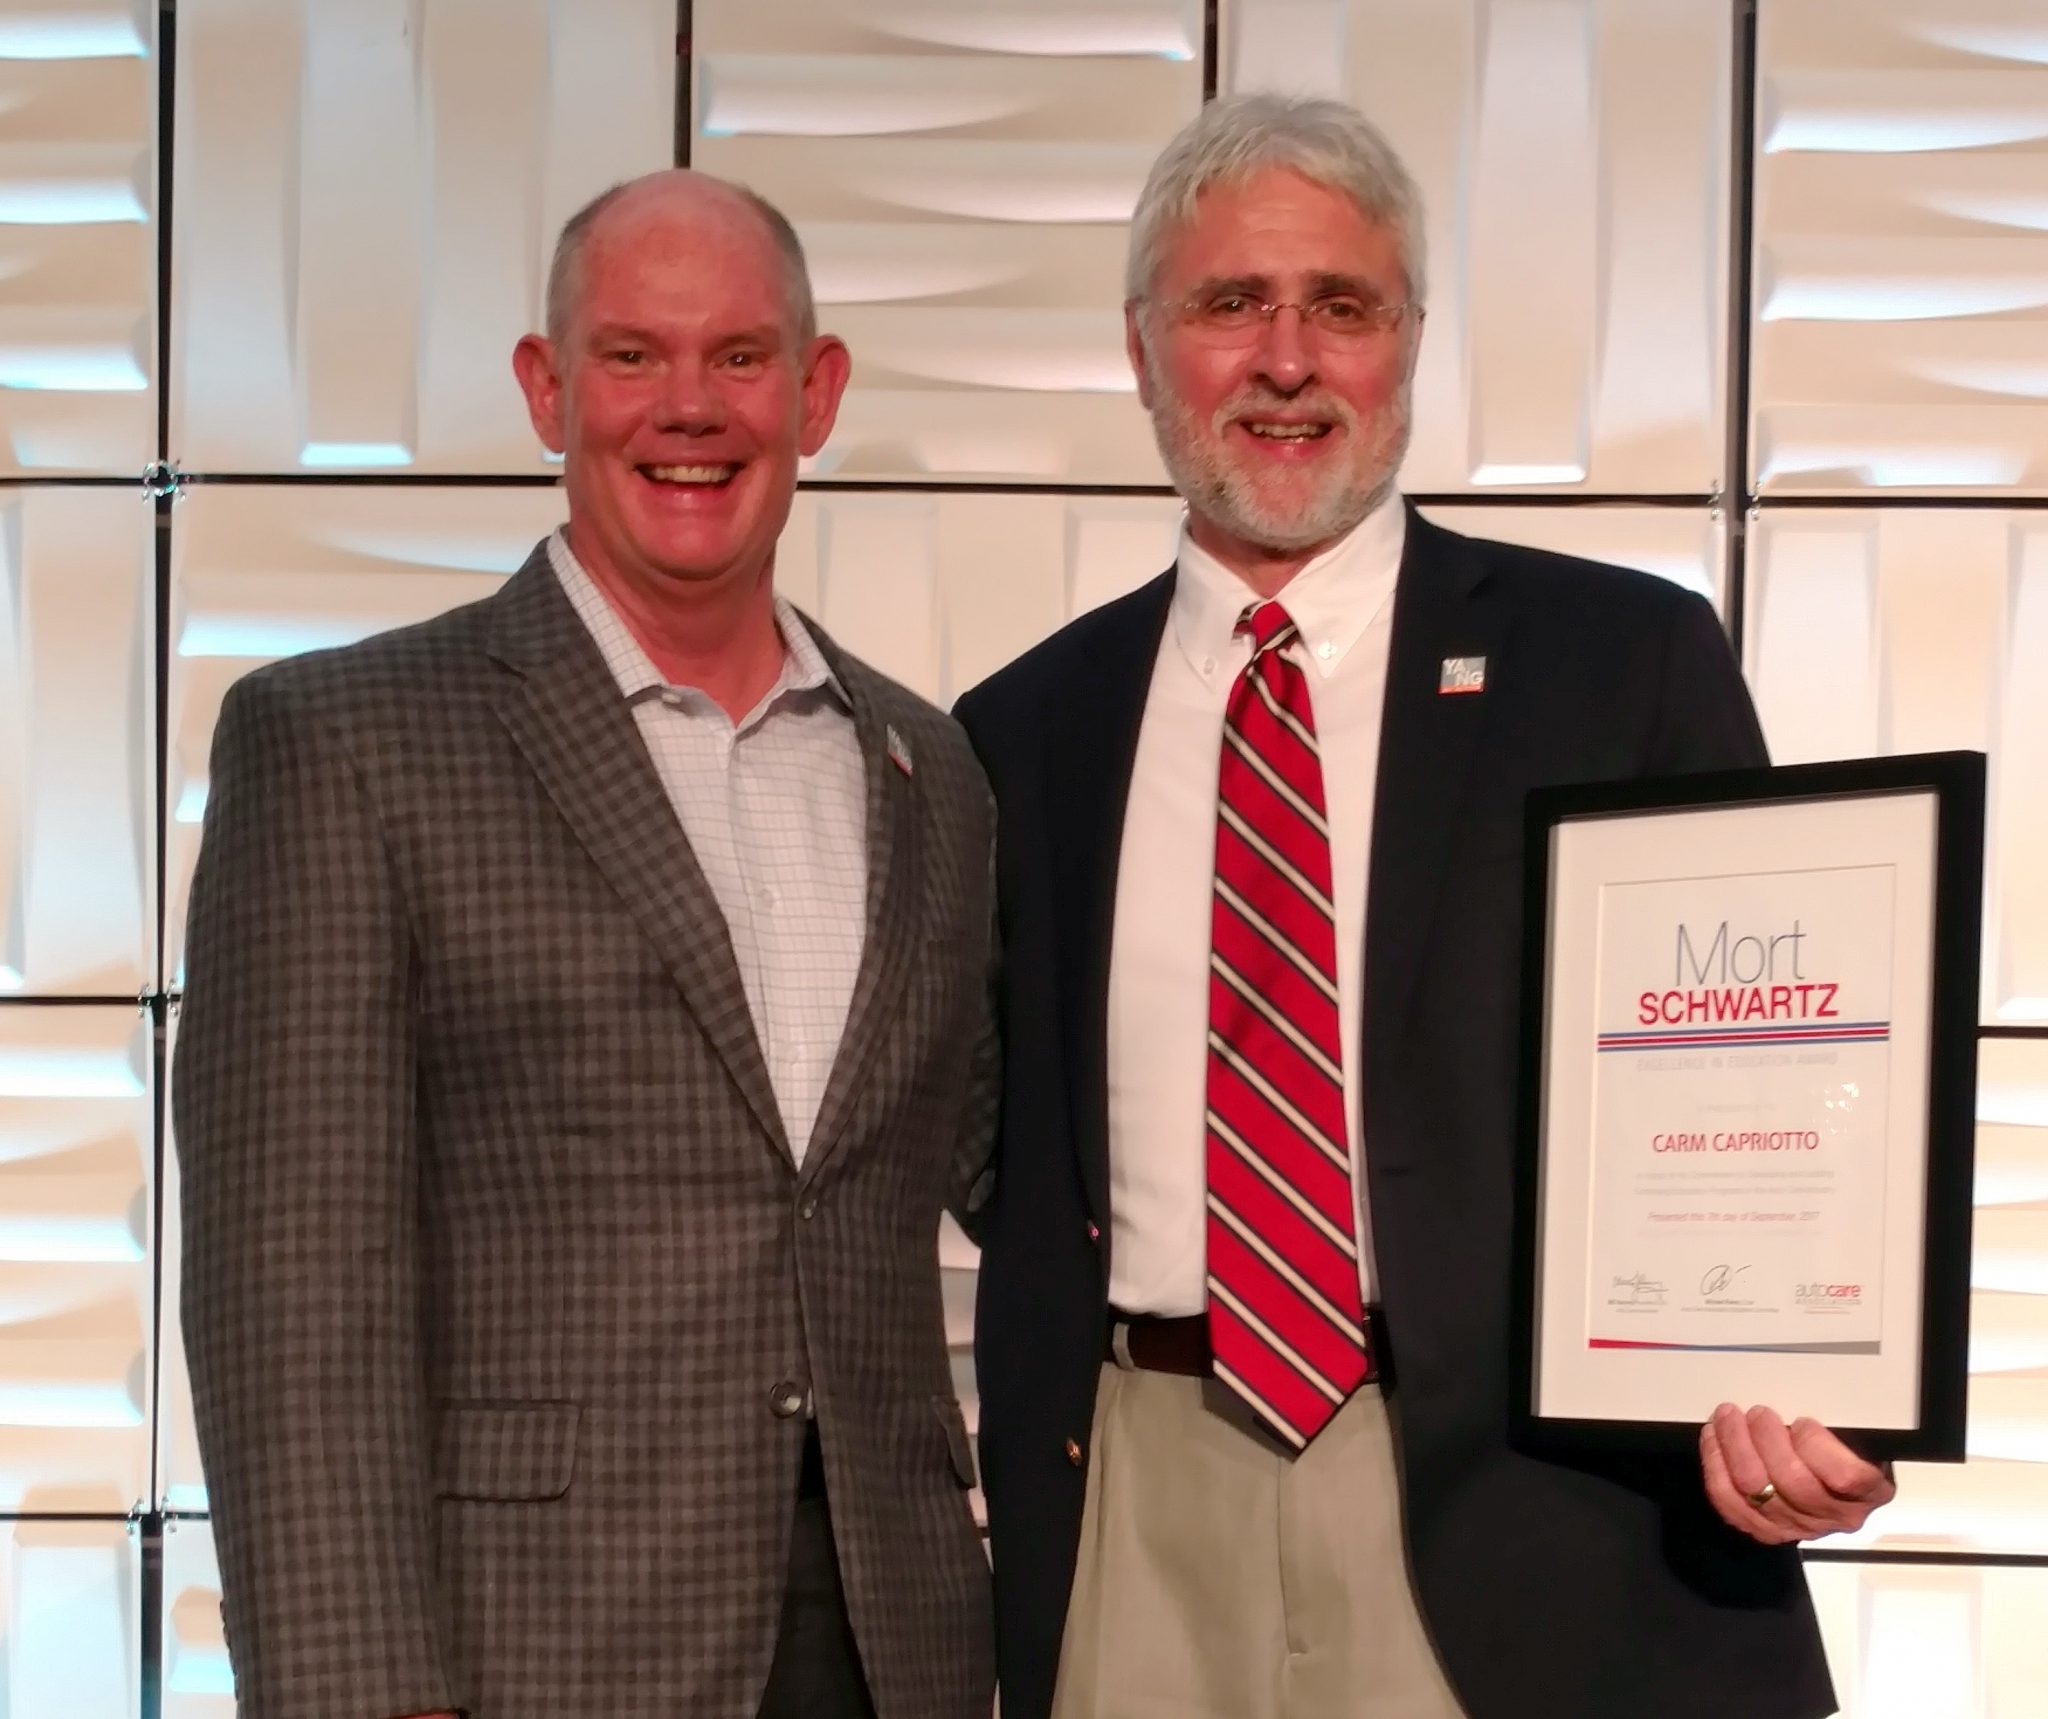 Bill Hanvey, Auto Care Association President and CEO presents Carm Capriotto the 2017 Mort Schwartz Excellence In Education Award